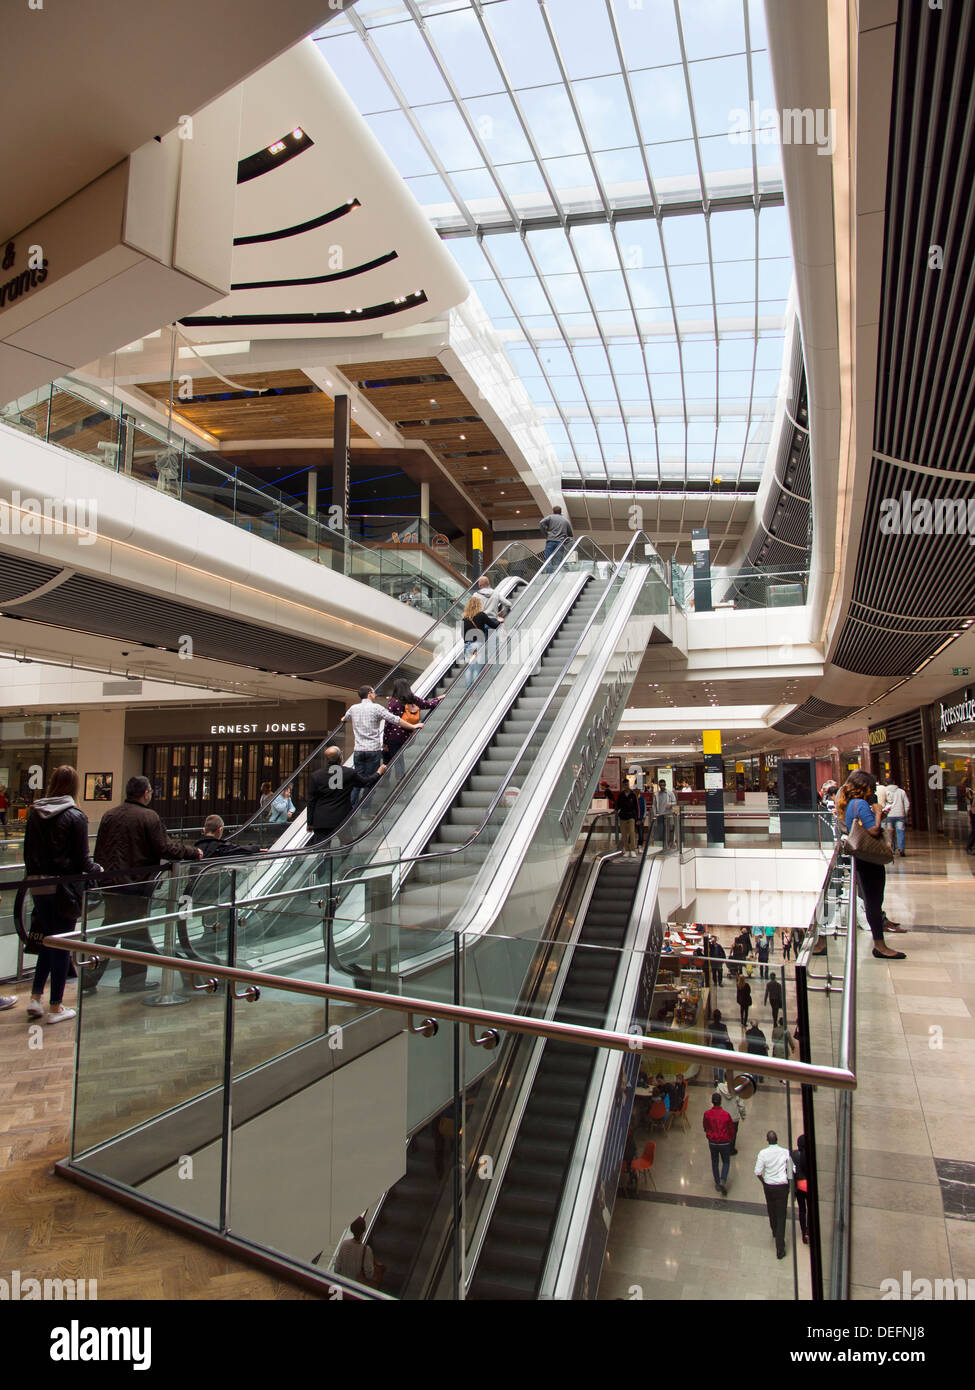 Interior of the Westfield Stratford City Shopping Centre, London 2 Stock Photo